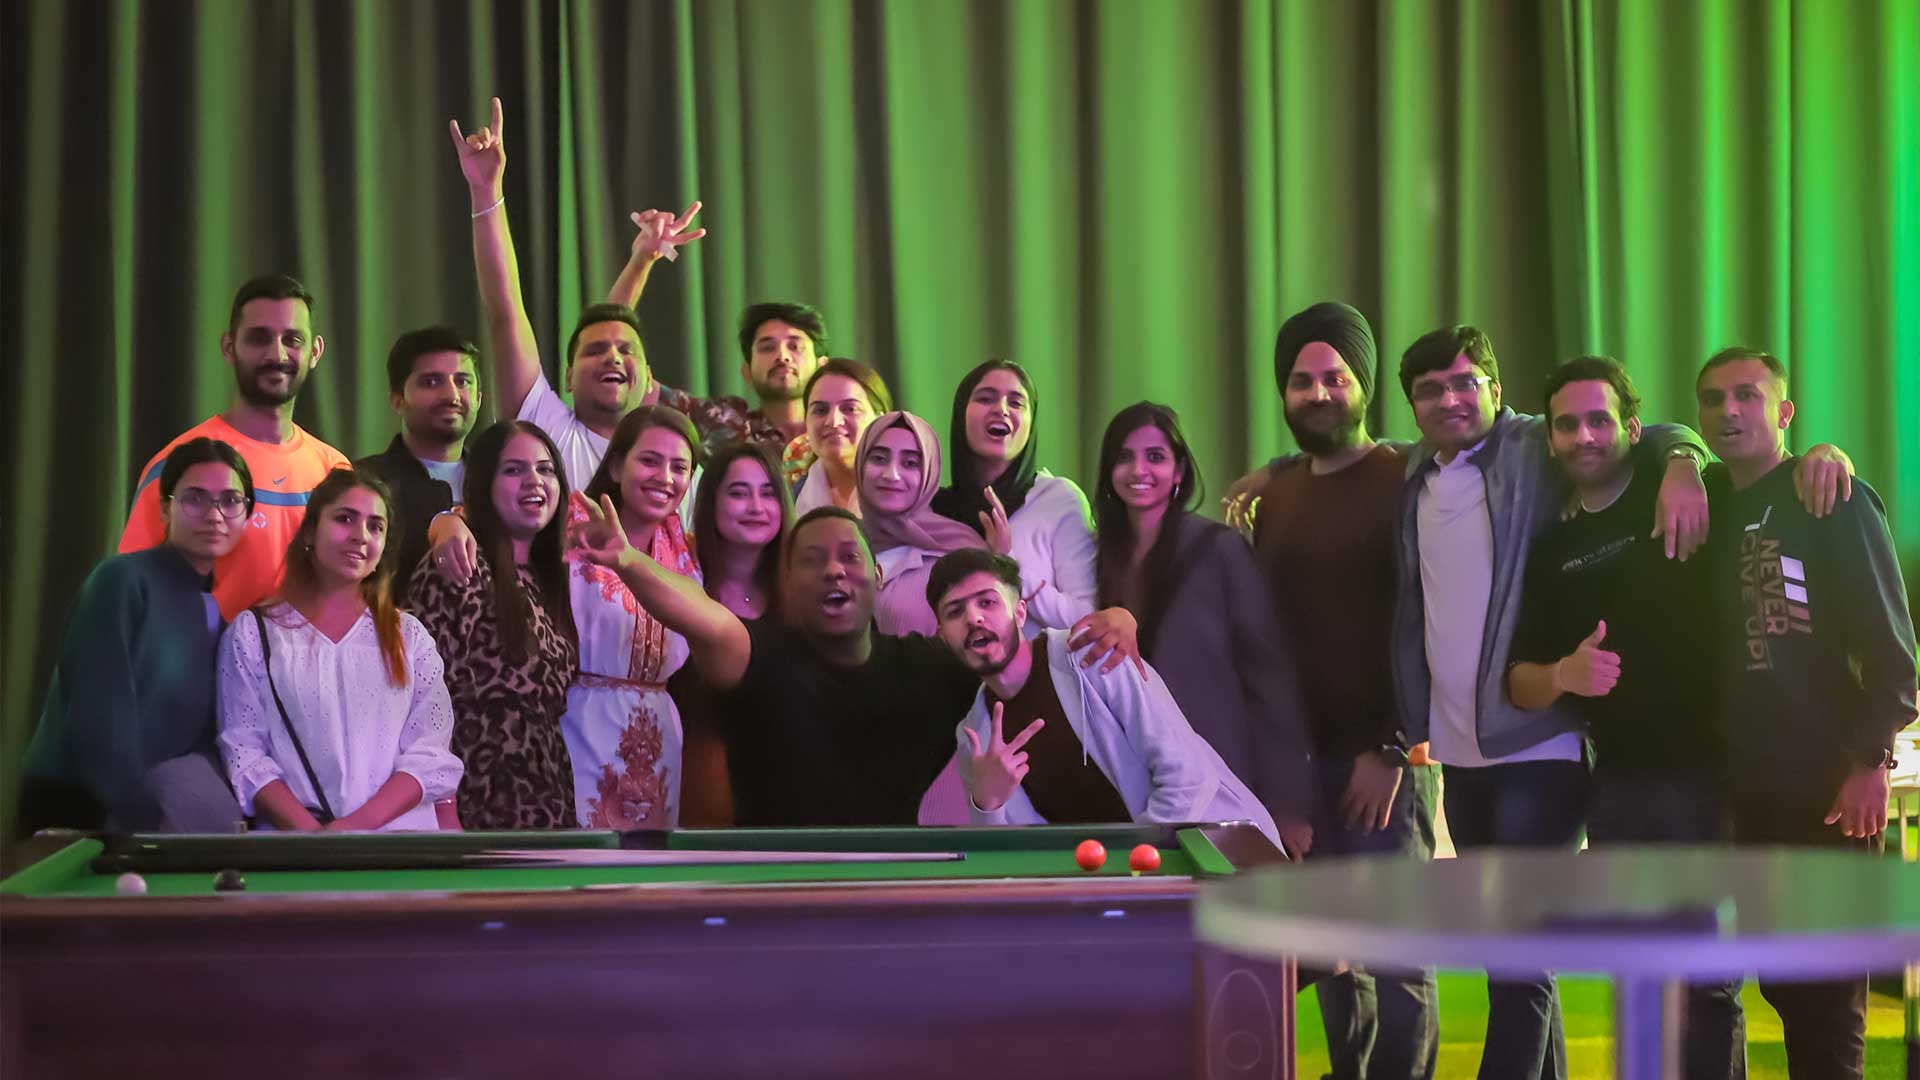 A group of students all posing for the camera by a pool table